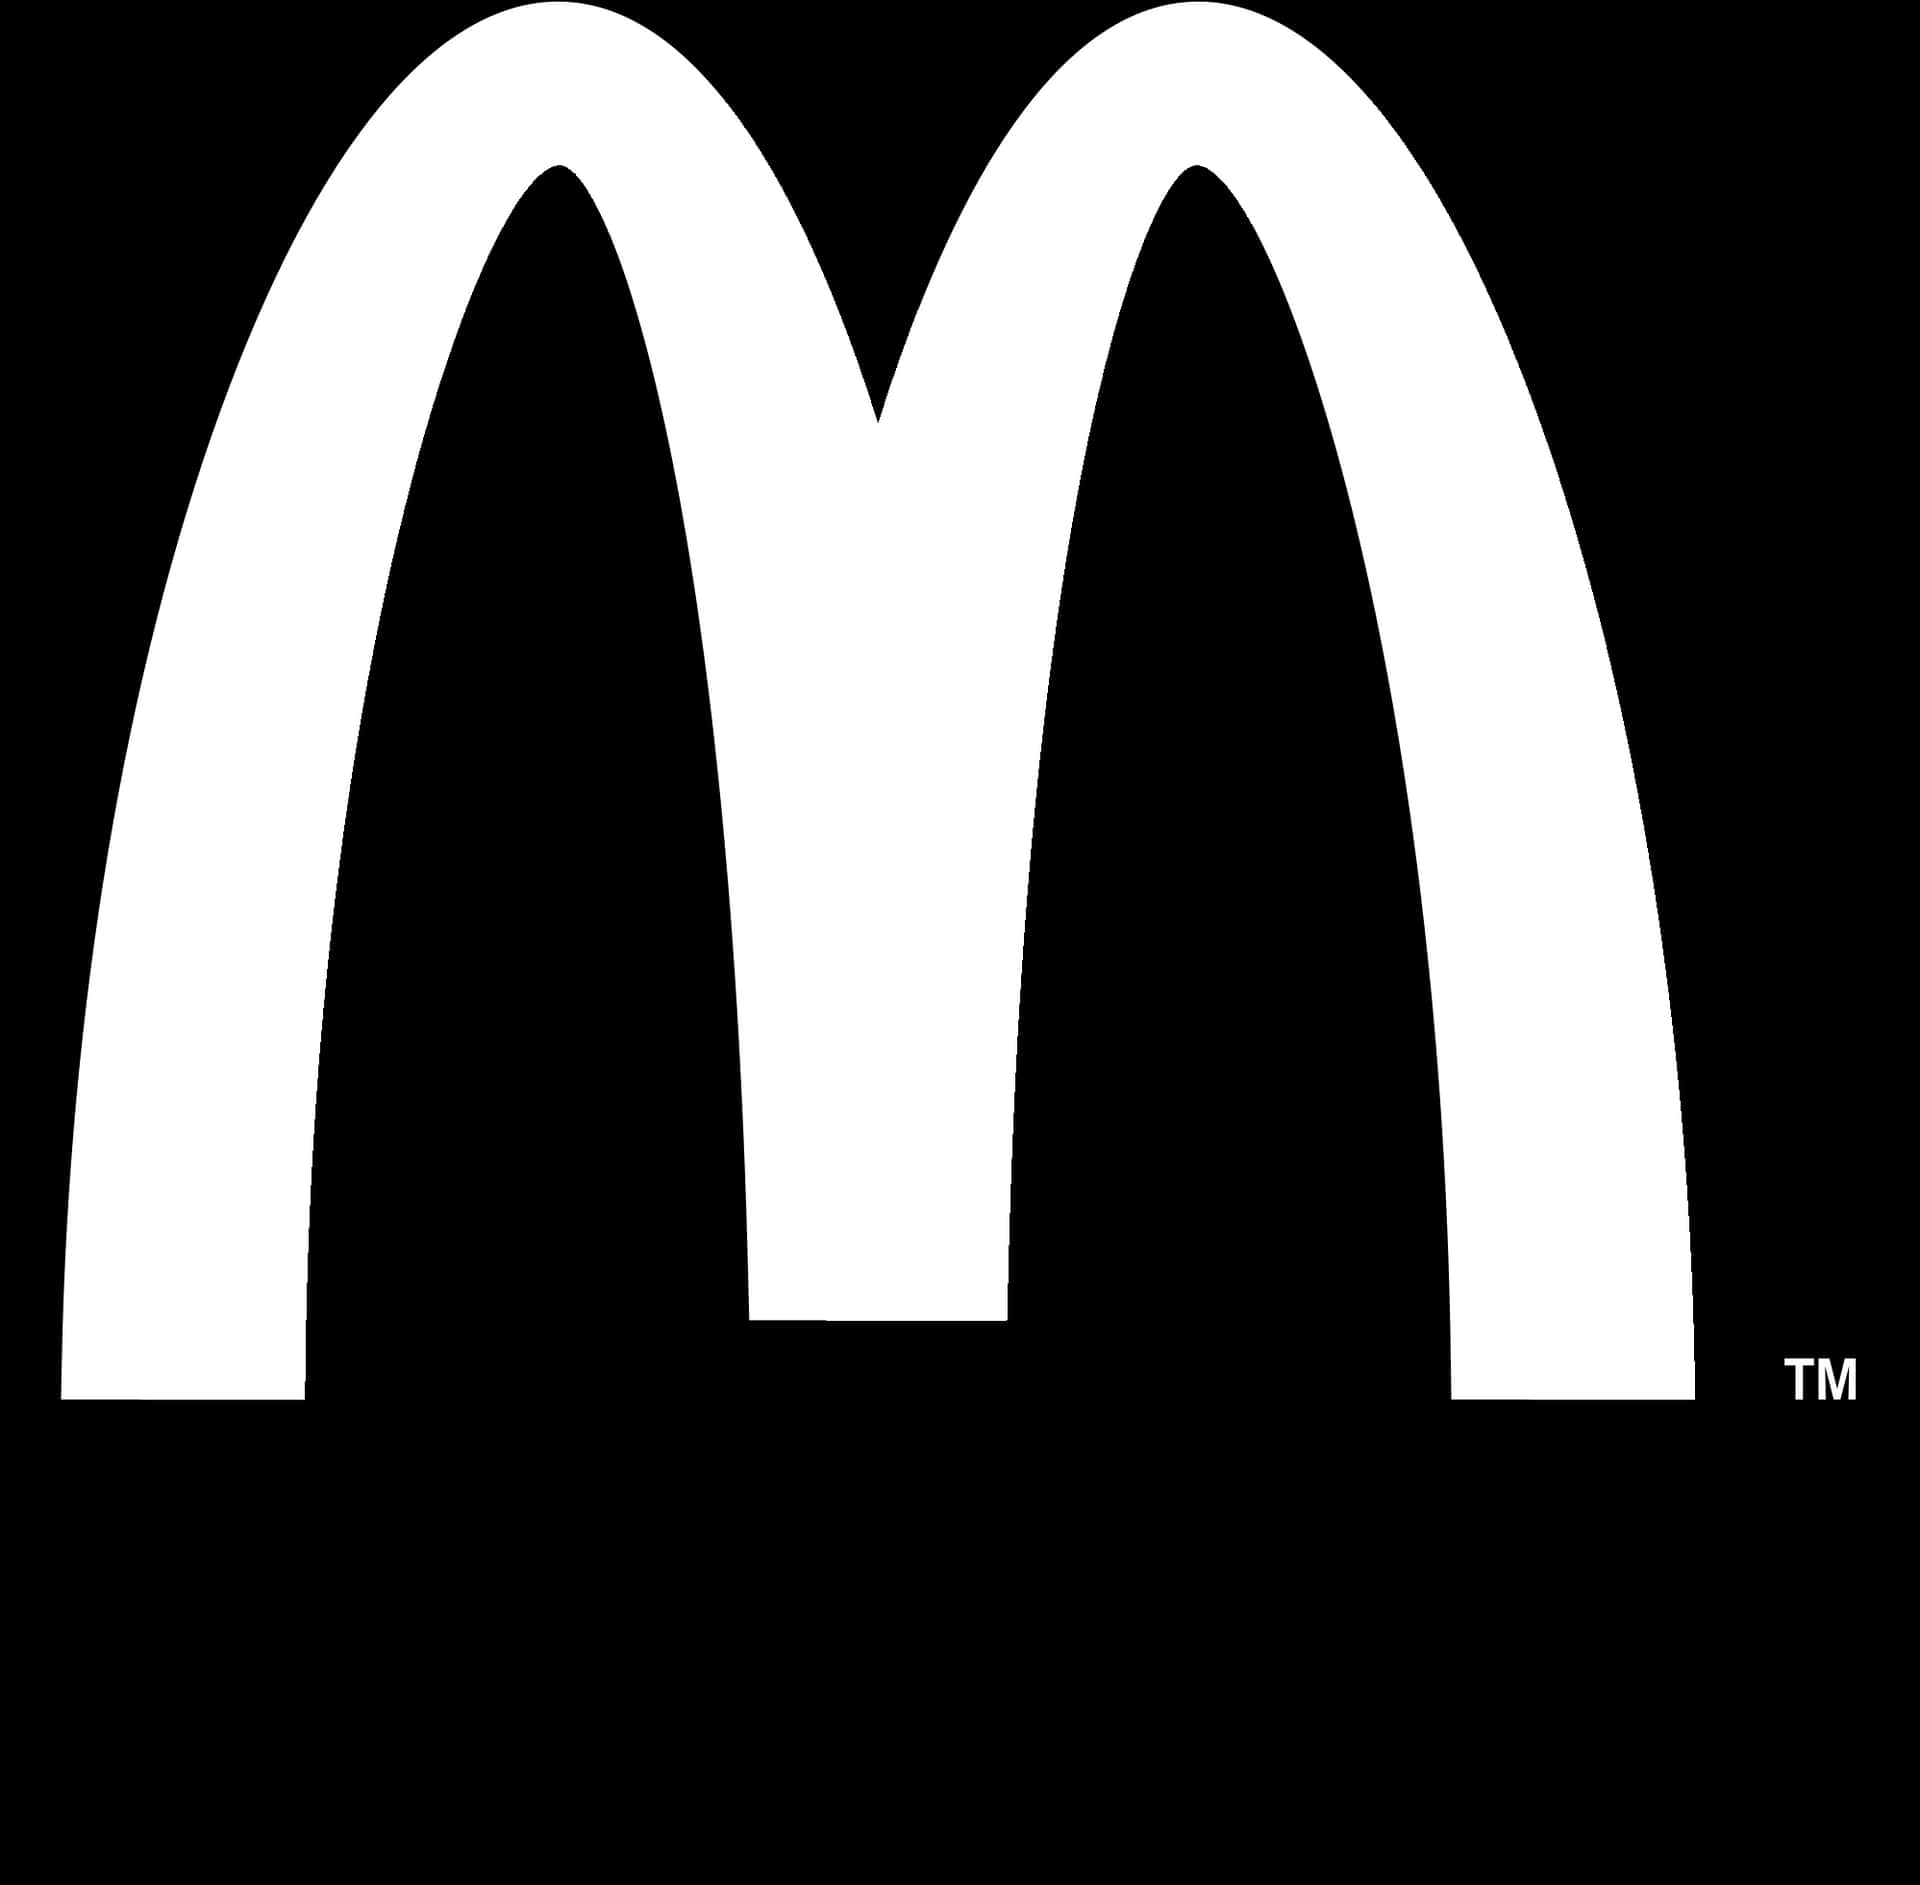 Mc Donalds Iconic Golden Arches Logo PNG